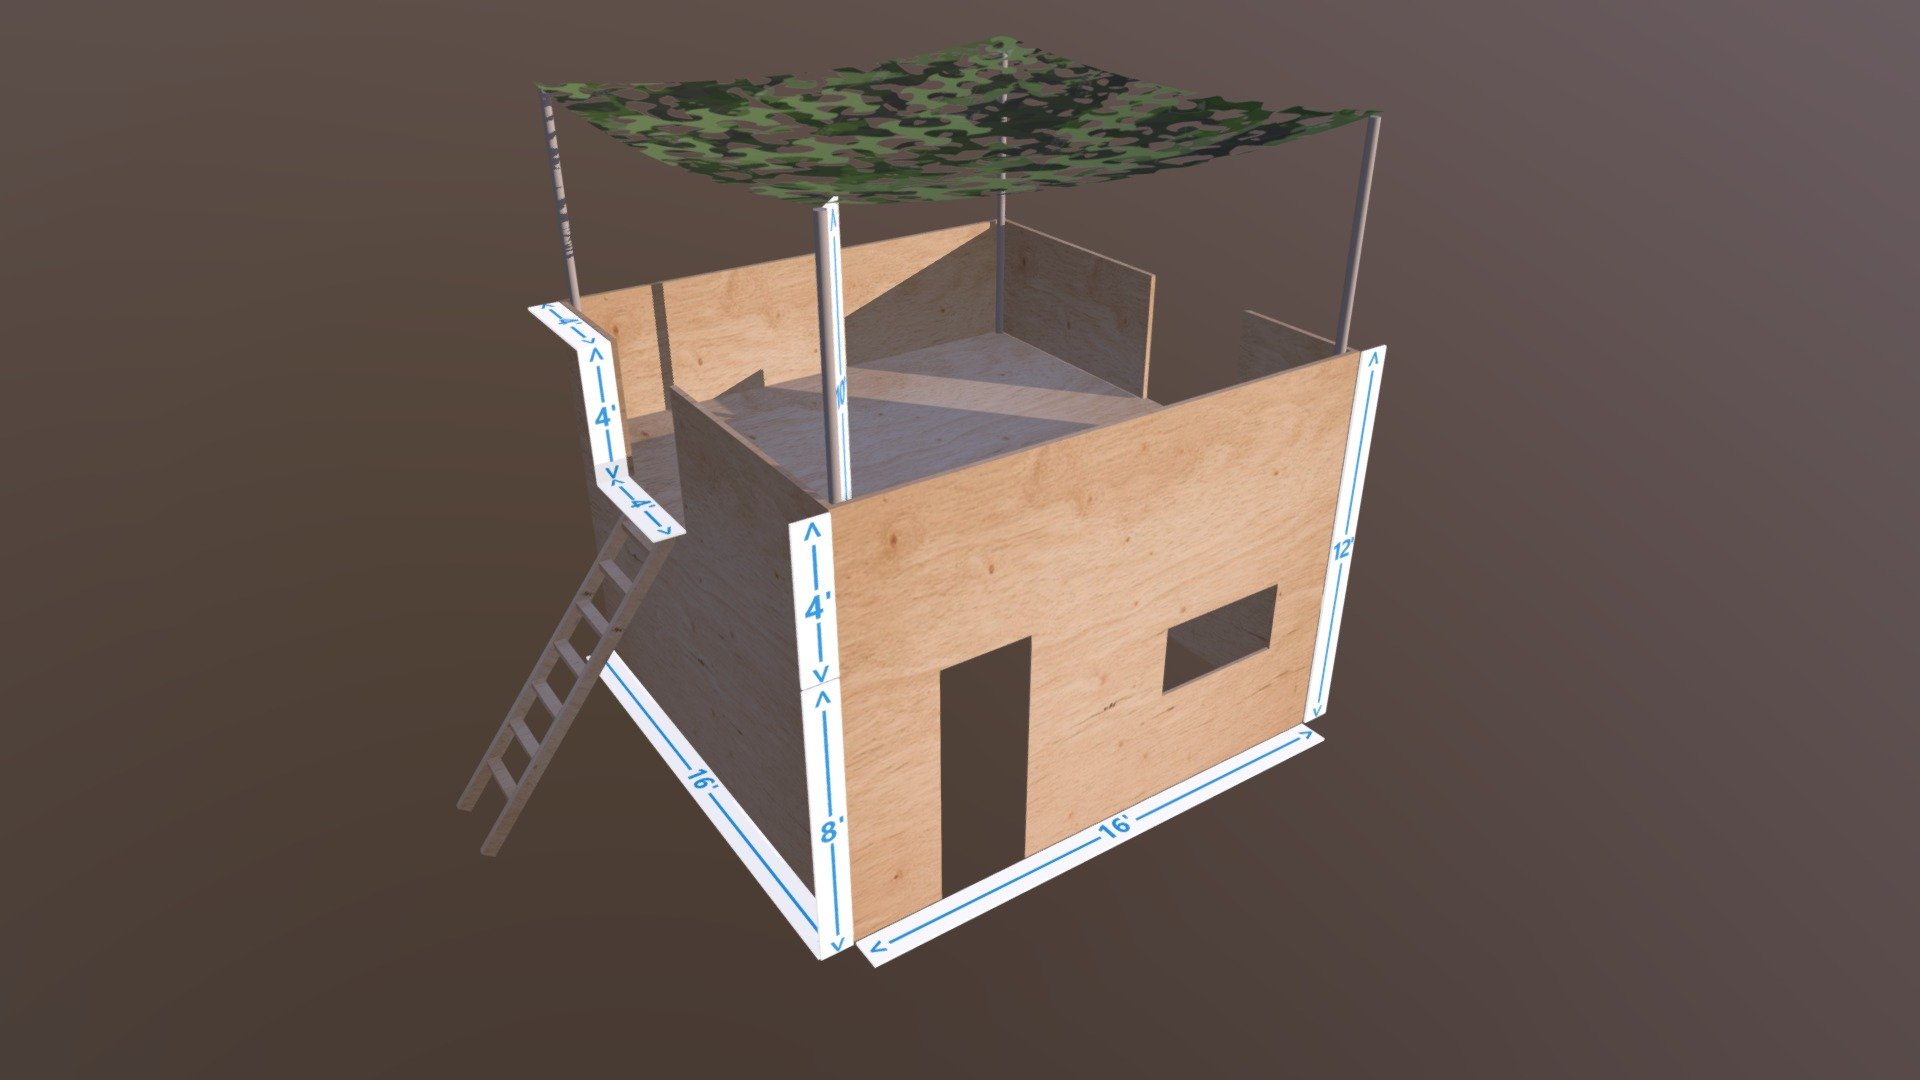 Another first pass at an airsoft structure I plan to build 3d model